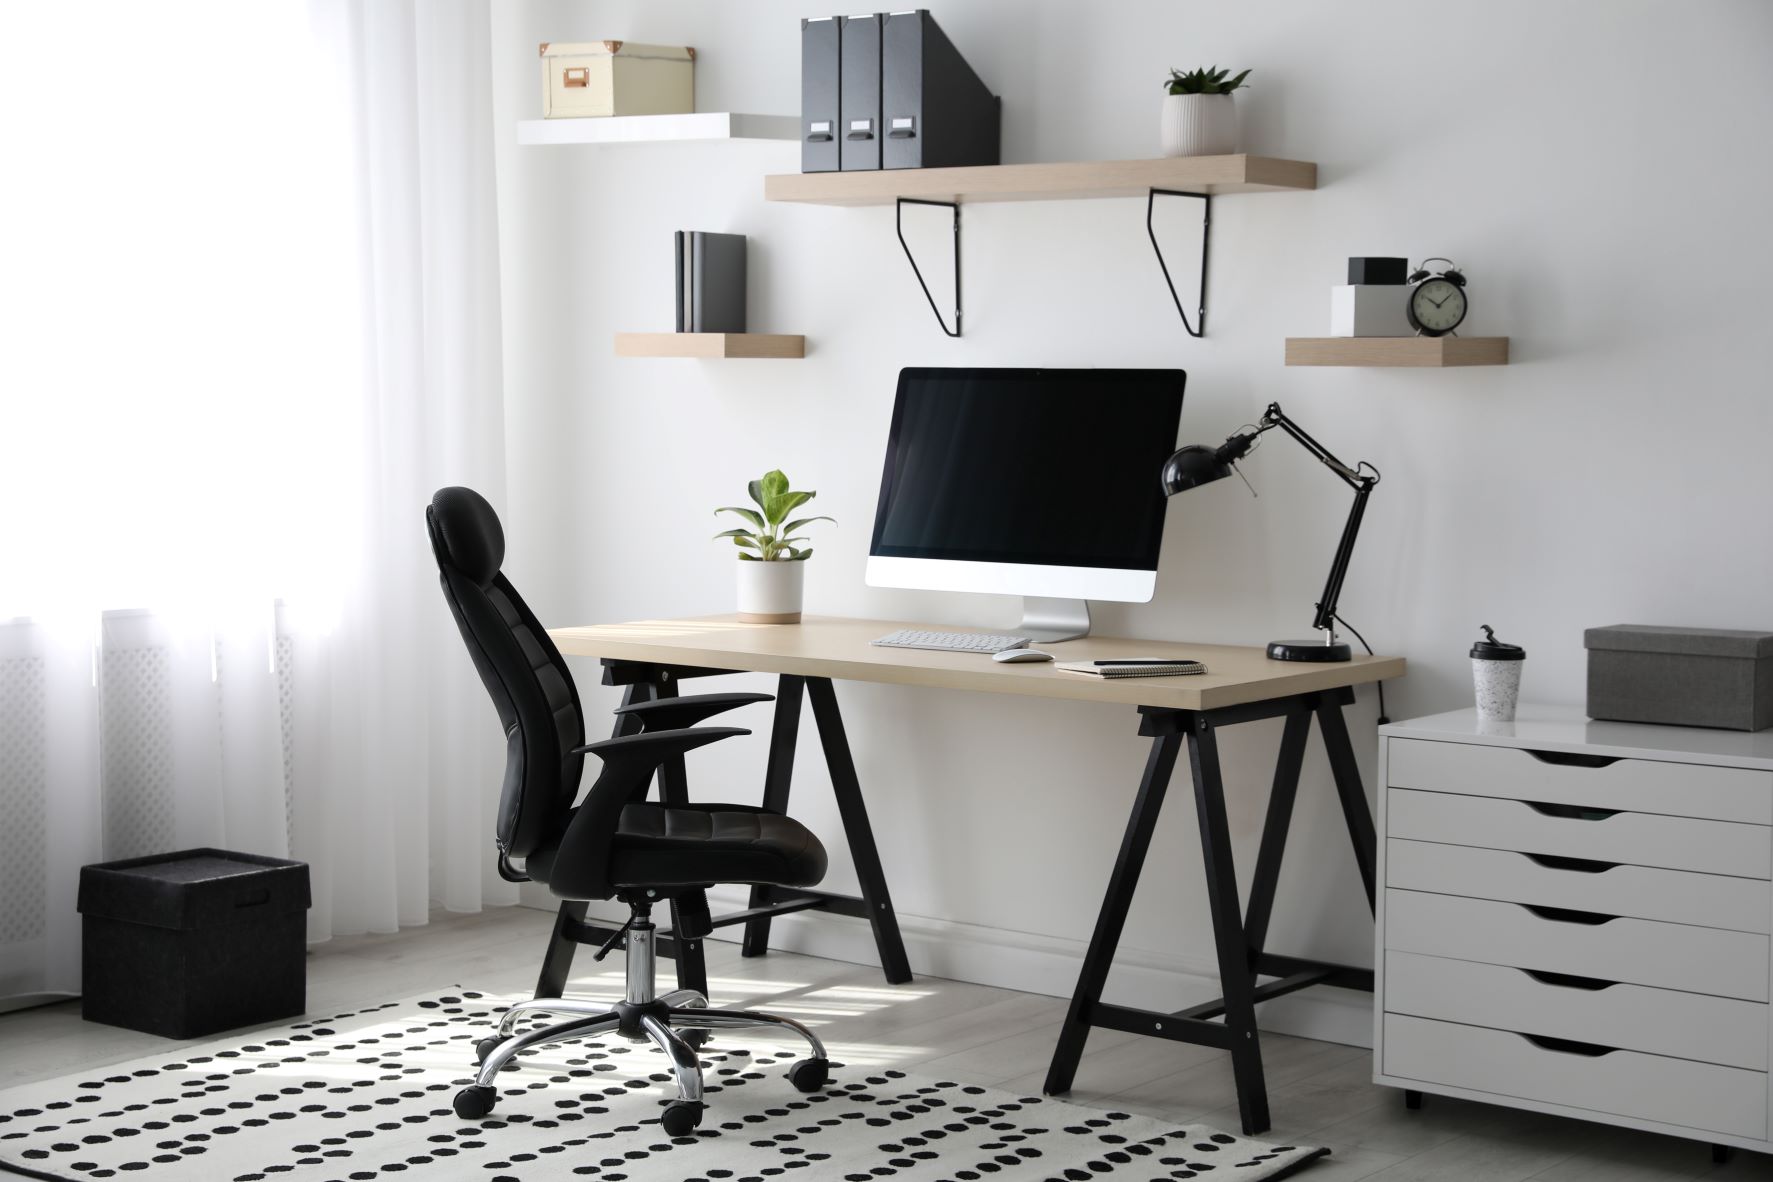 What Makes a Modern Office? 5 Furniture Pieces To Refresh Your Office